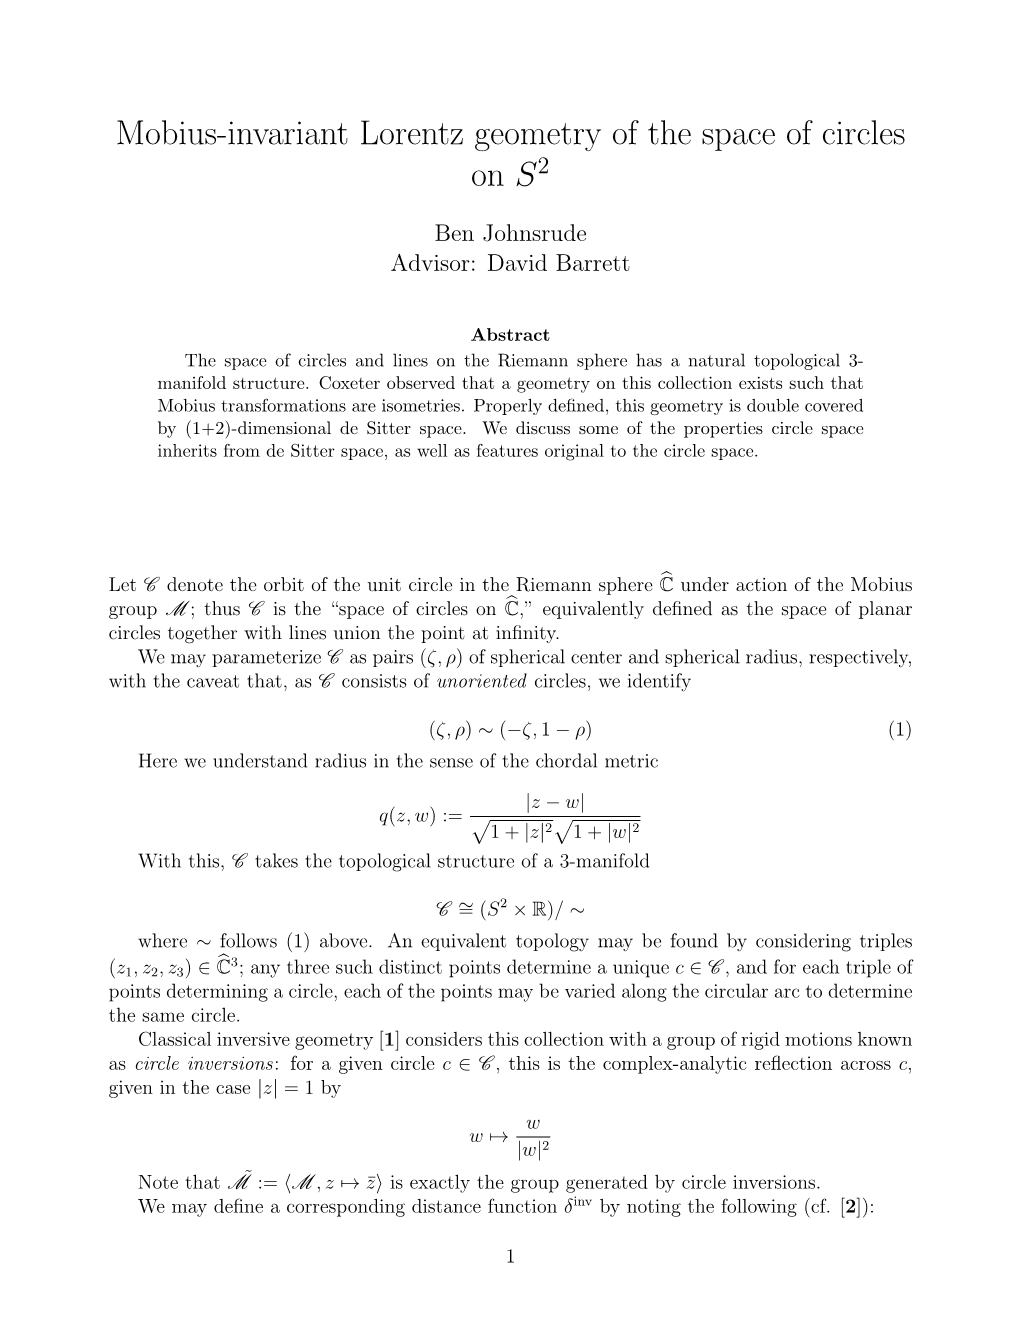 Mobius-Invariant Lorentz Geometry of the Space of Circles on S2